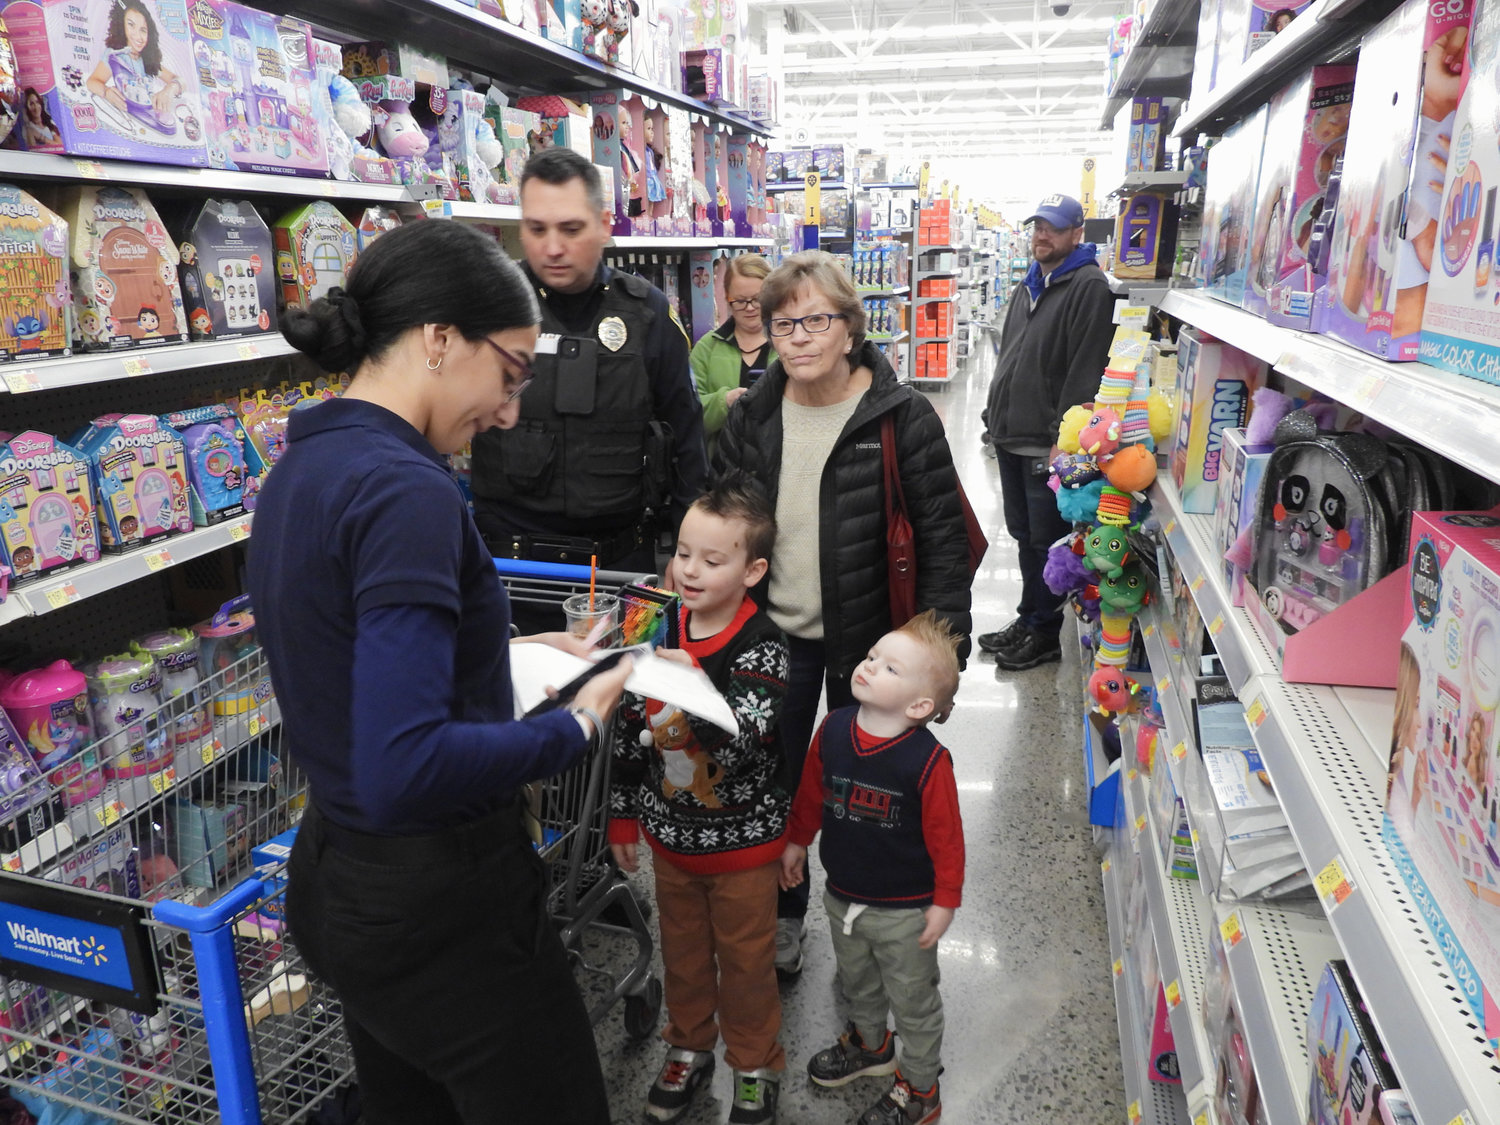 More than 80 children got a chance to shop with a cop at the Oneida Police Department's annual Shop with a Cop, where they got to meet and talk with local police officers while shopping for everything on their Christmas list.